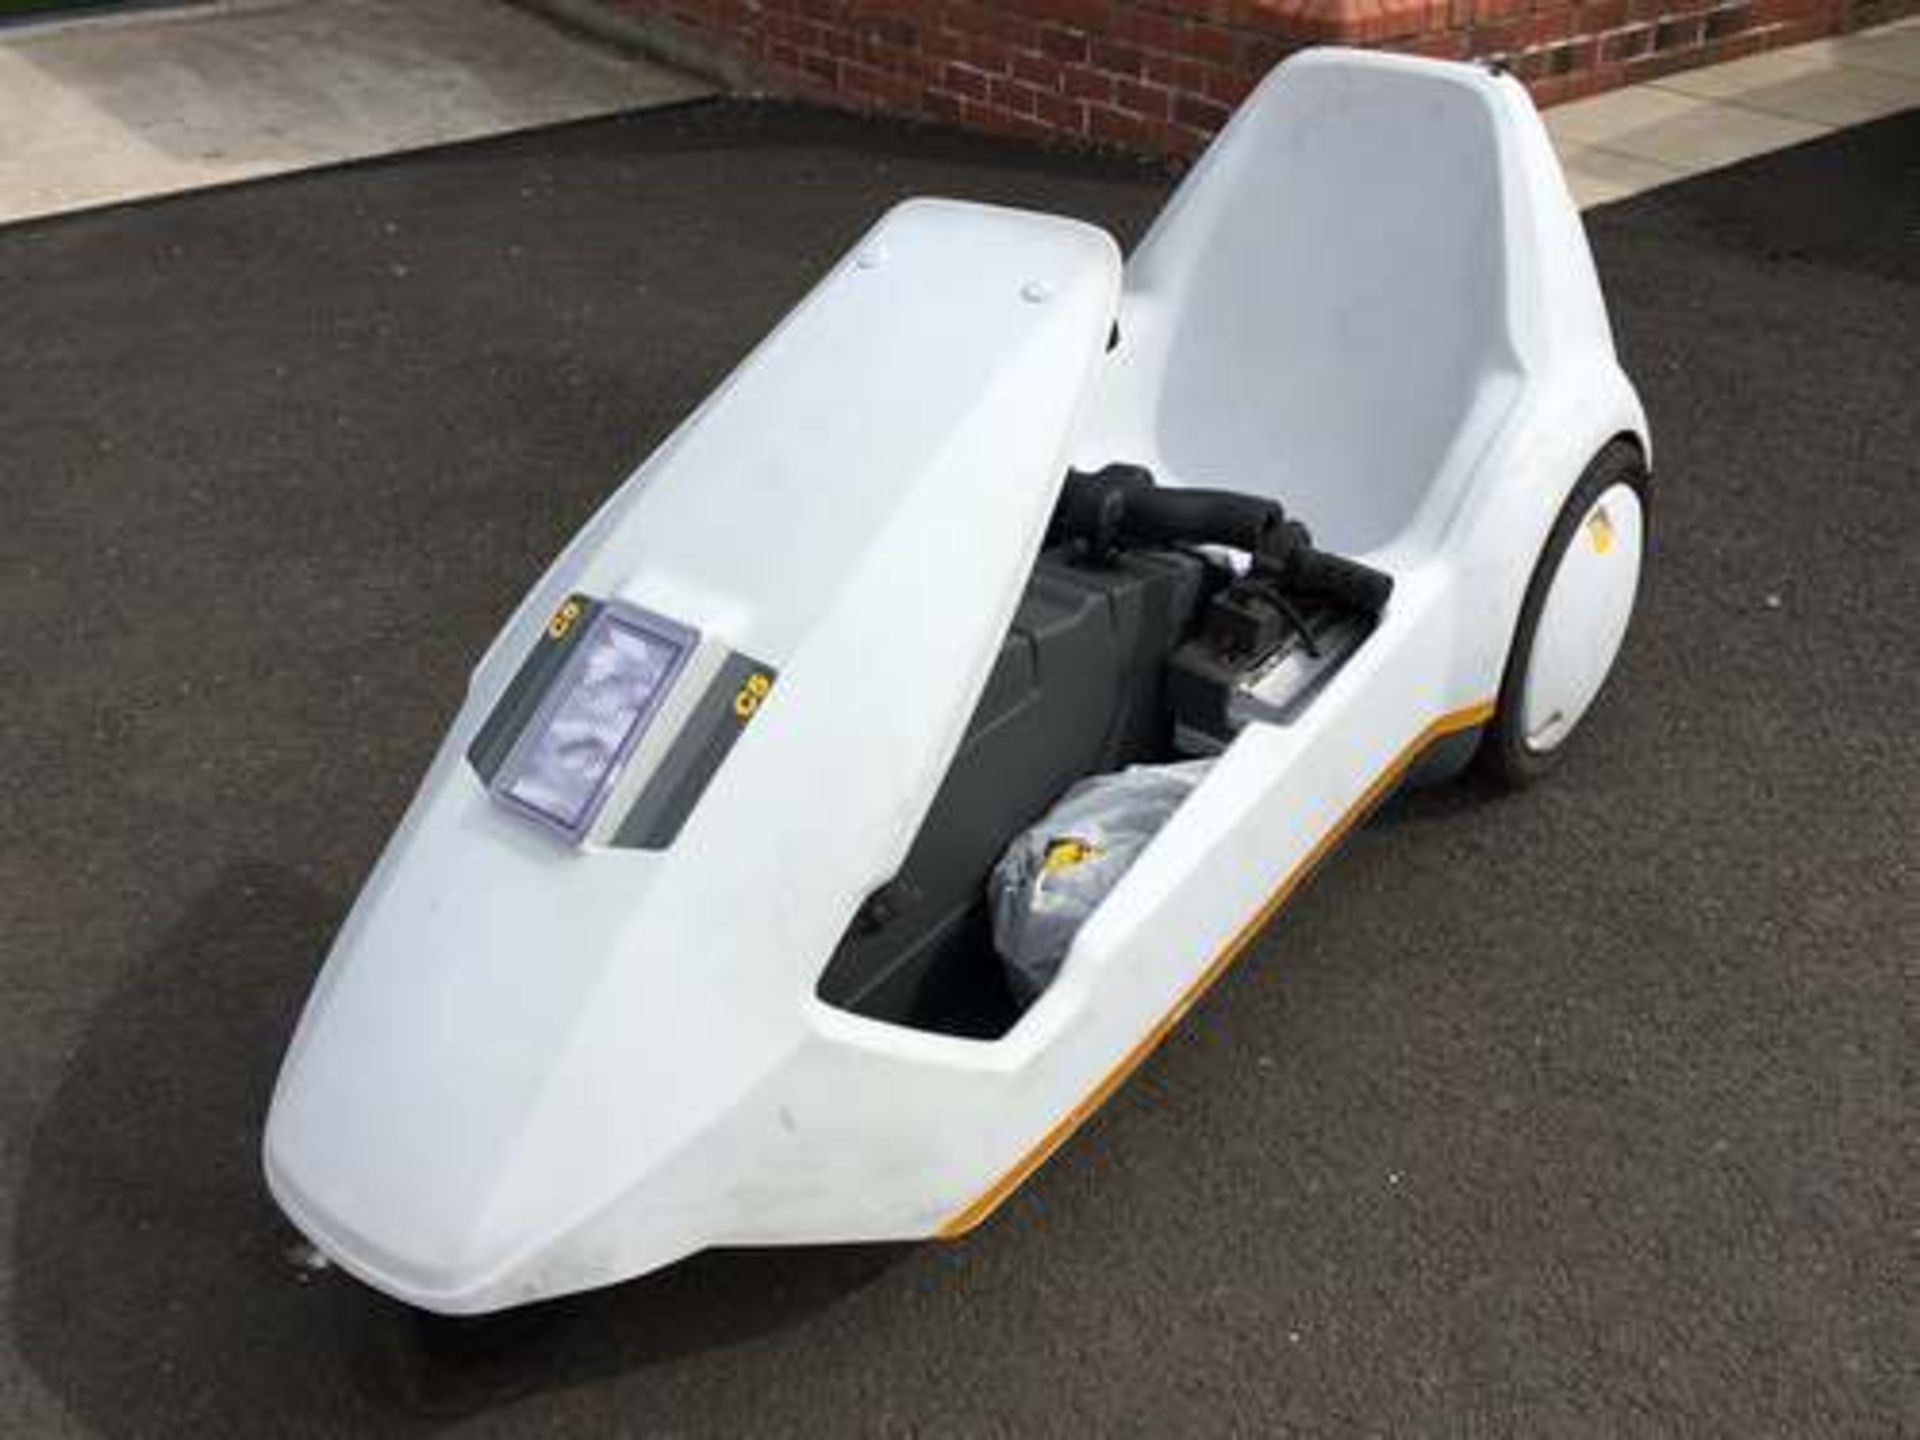 SINCLAIR C5 PEDAL TRICYCLE WITH BATTERY, CHARGING CABLE AND C5 TOOL KIT - Image 2 of 7